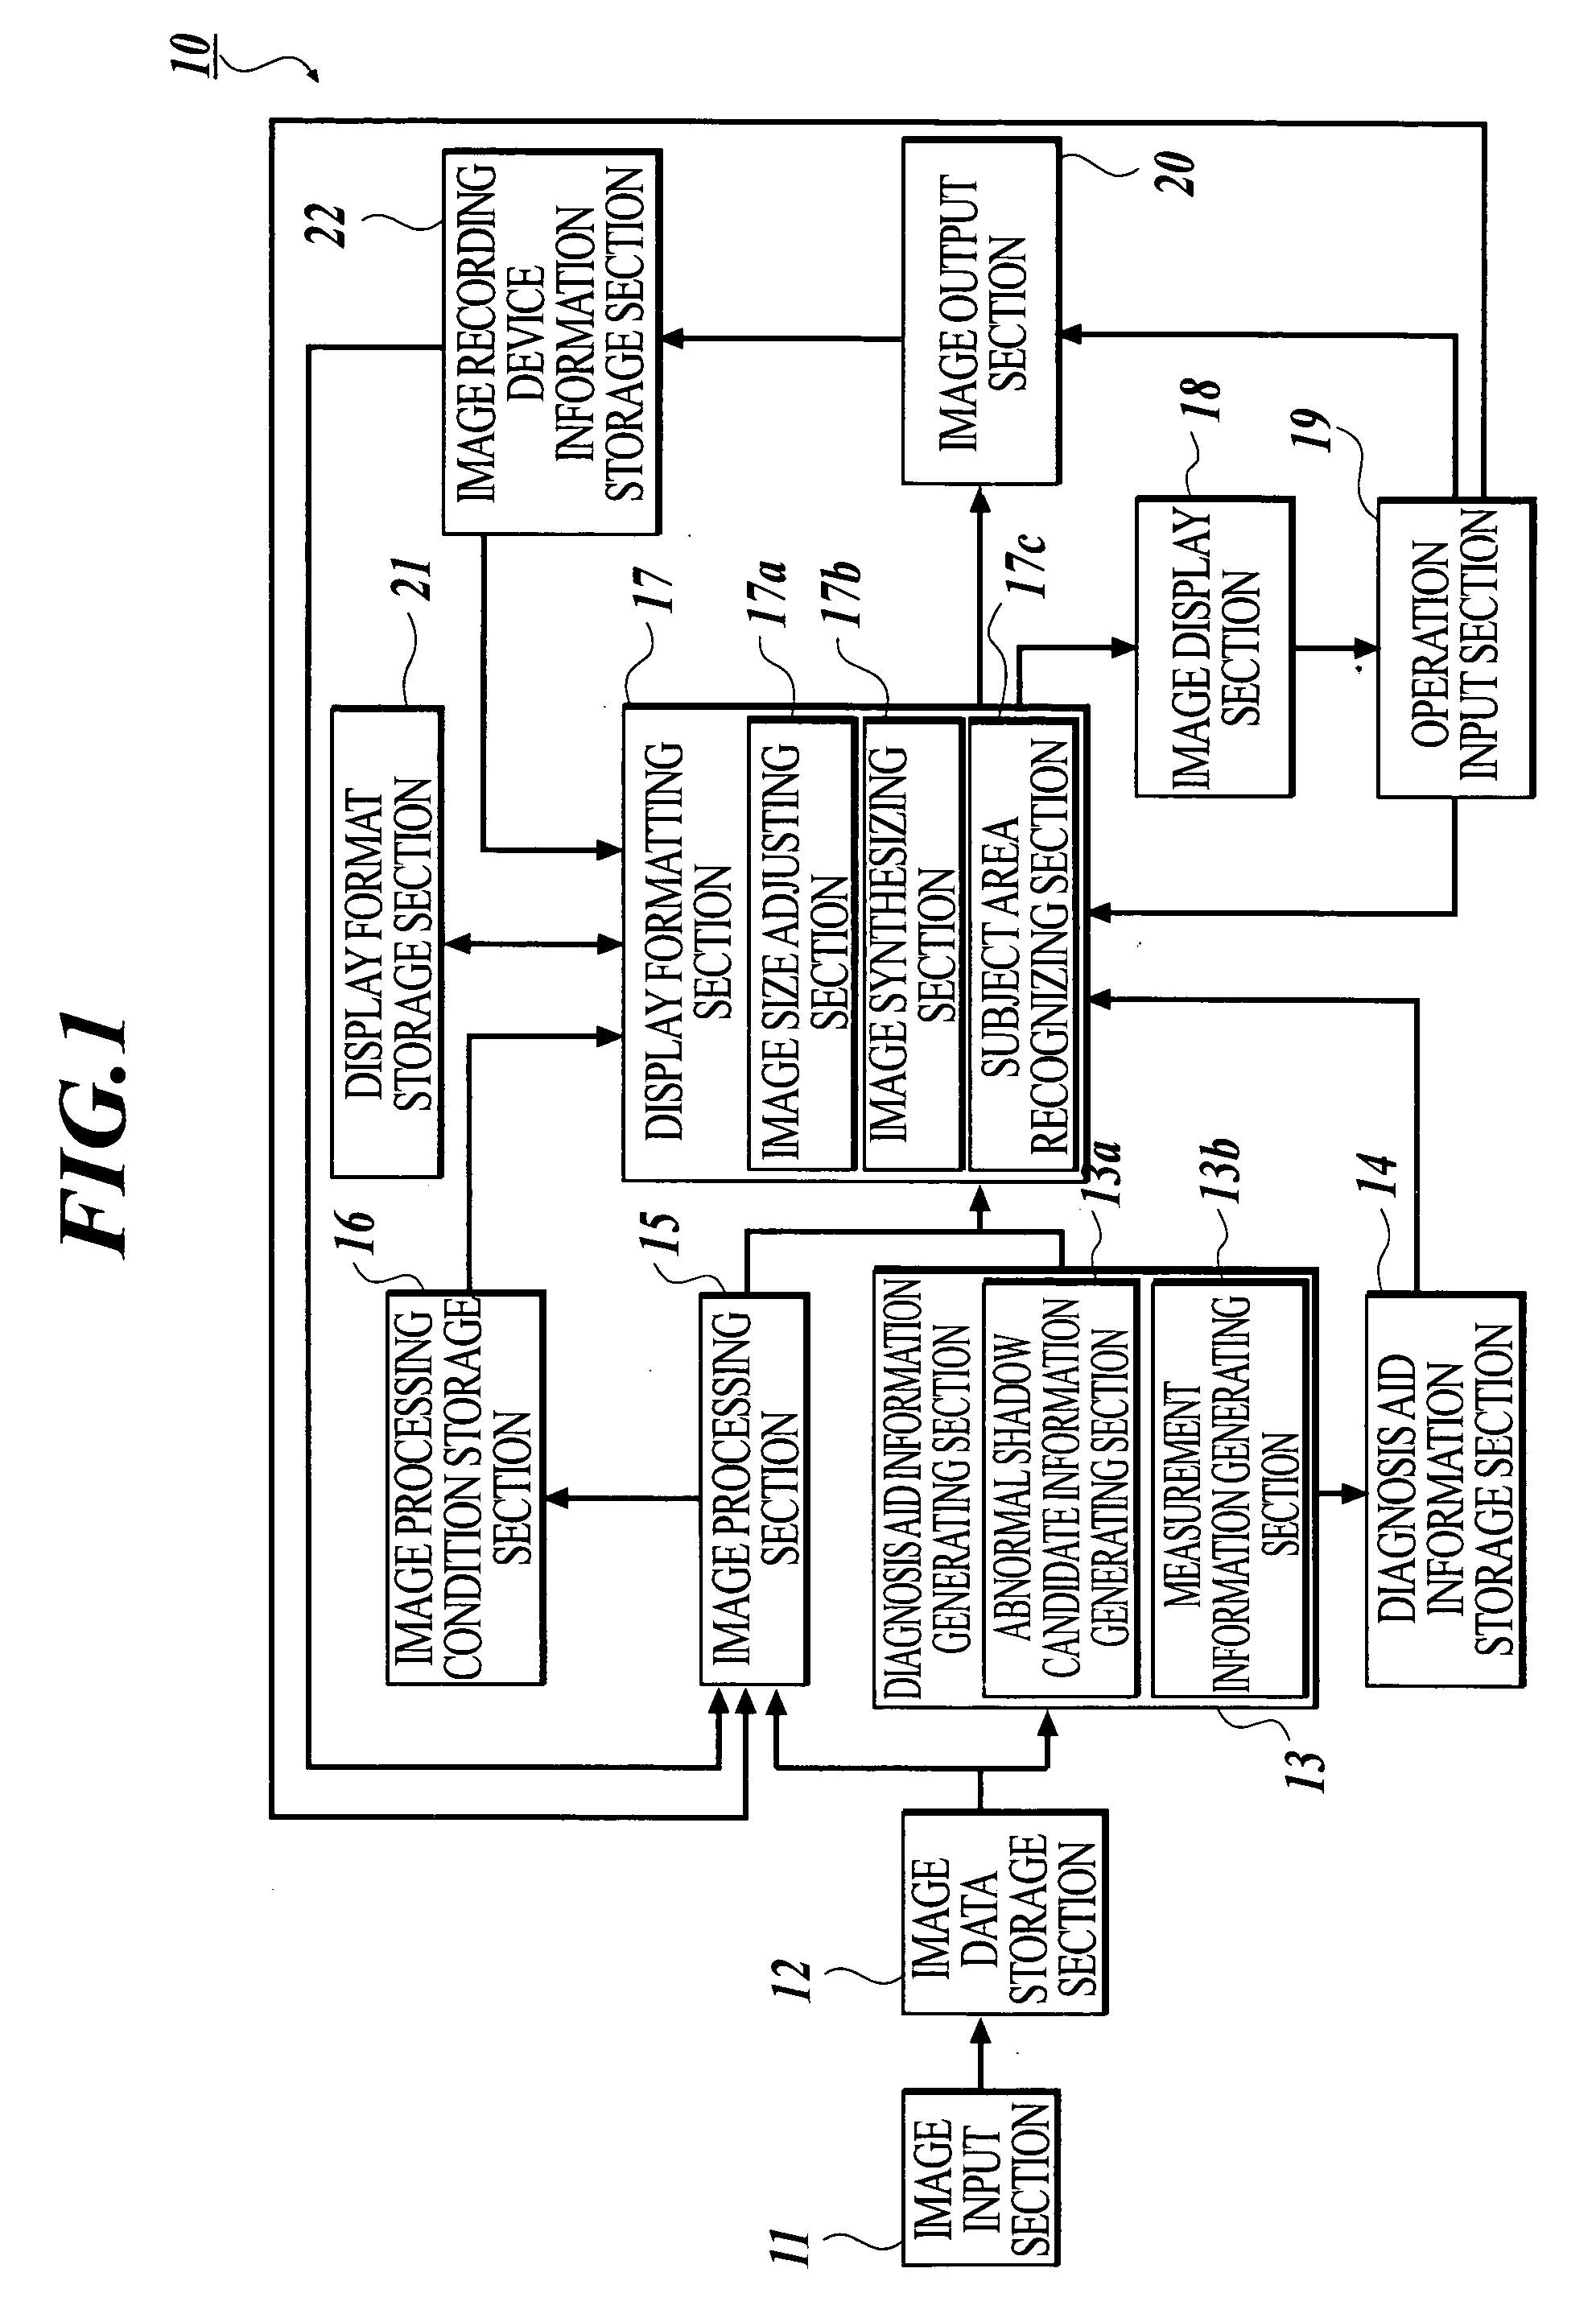 Medical image processing system and method for processing medical image